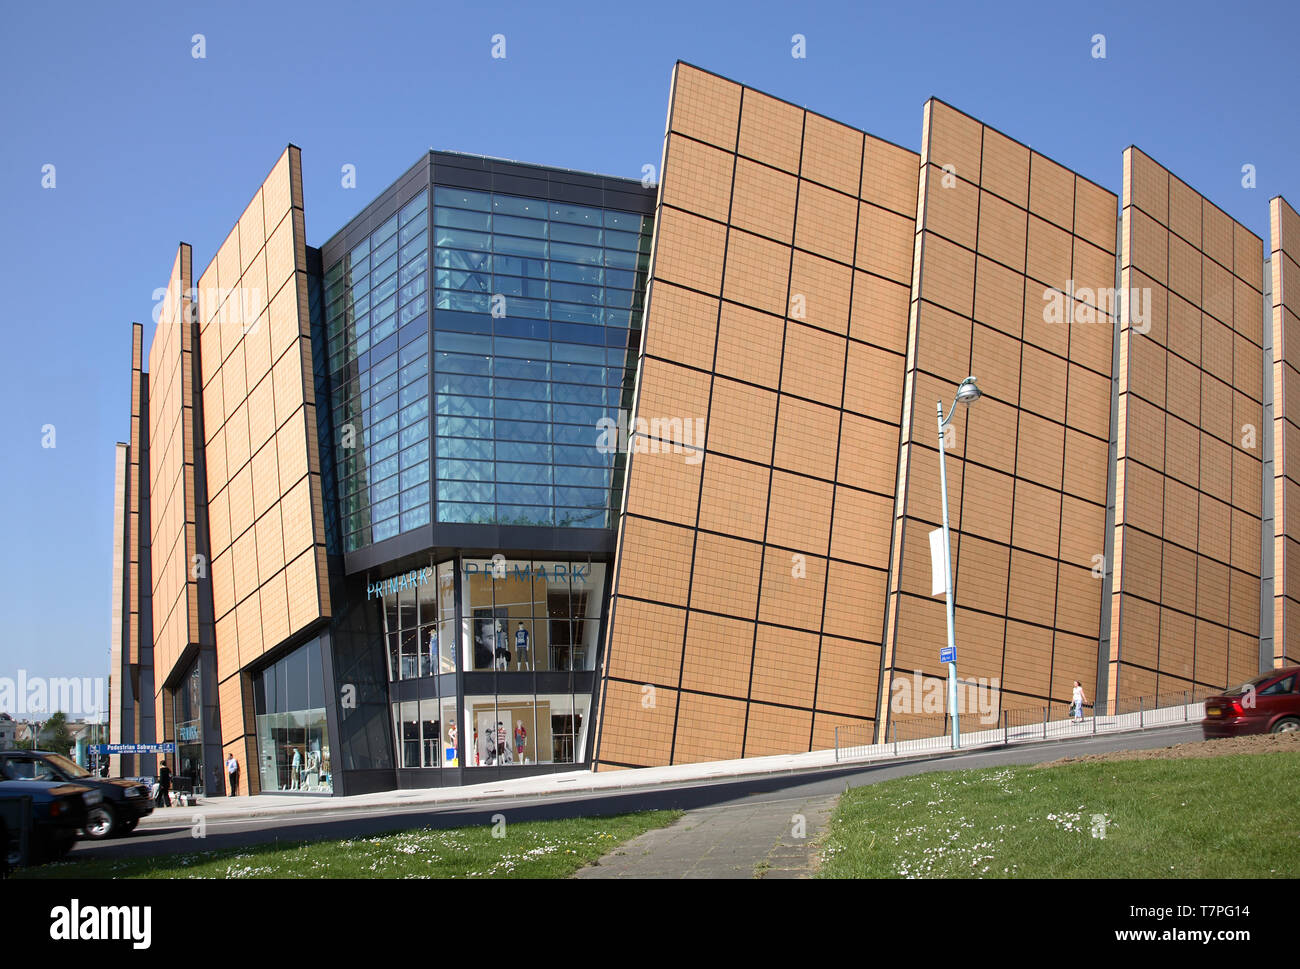 Exterior view of the Drake Circus shopping centre, Plymouth. Opened in 2006, designed by Chapman Taylor architects. Stock Photo